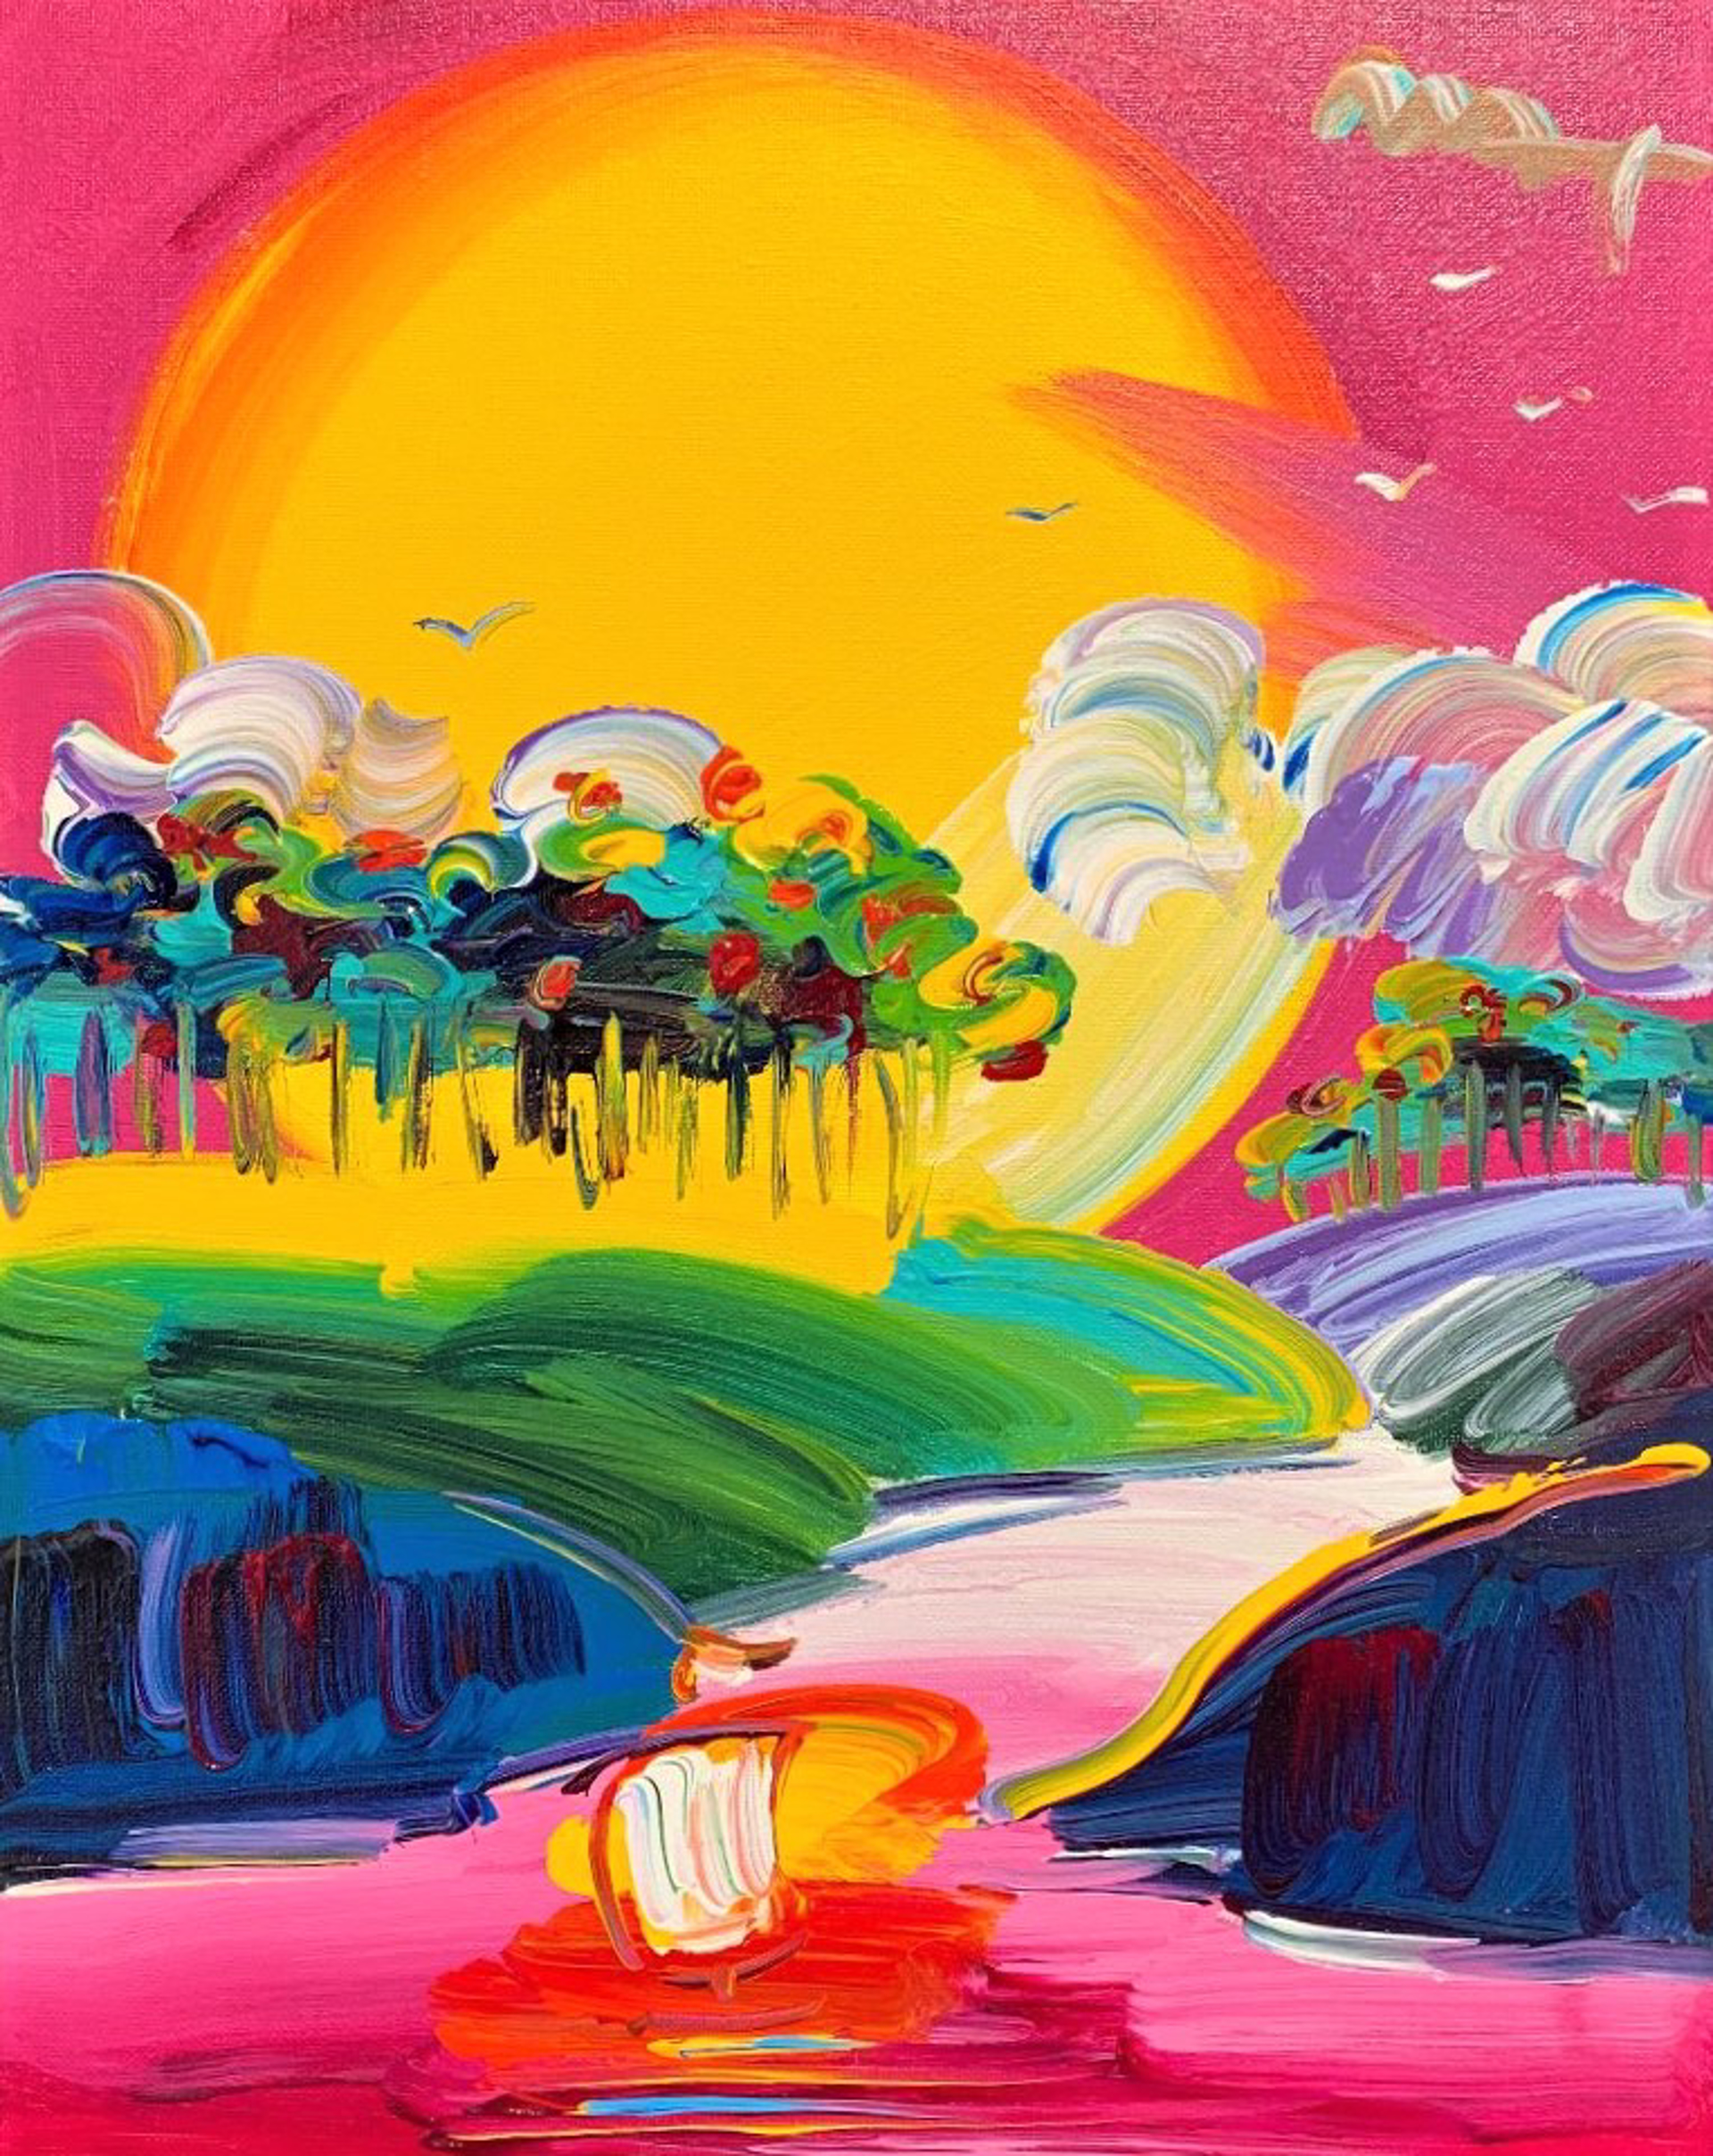 Without Borders by Peter Max